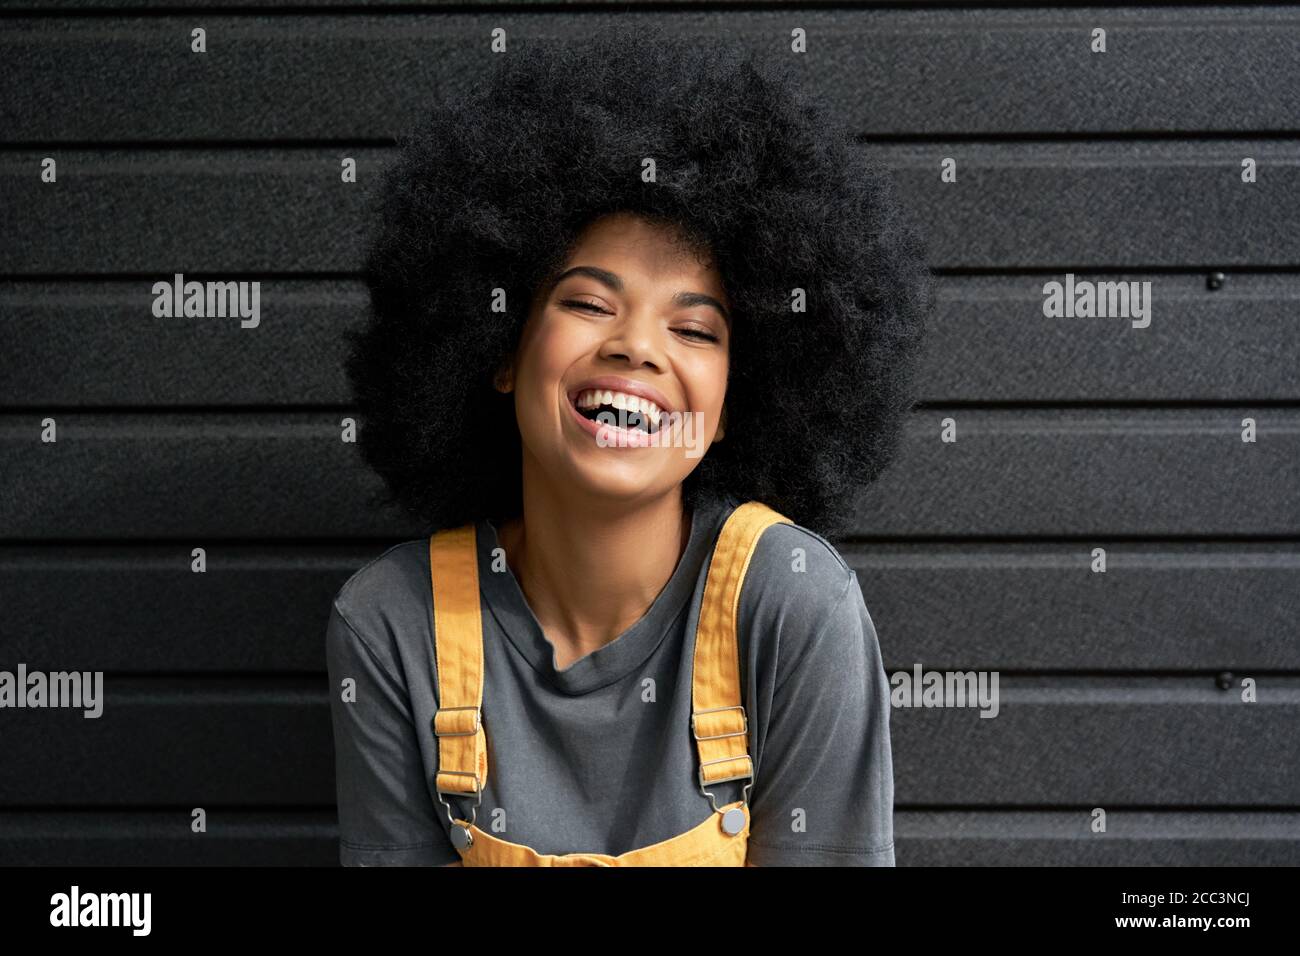 Happy African teen hipster girl with Afro hair laughing at camera, headshot. Stock Photo